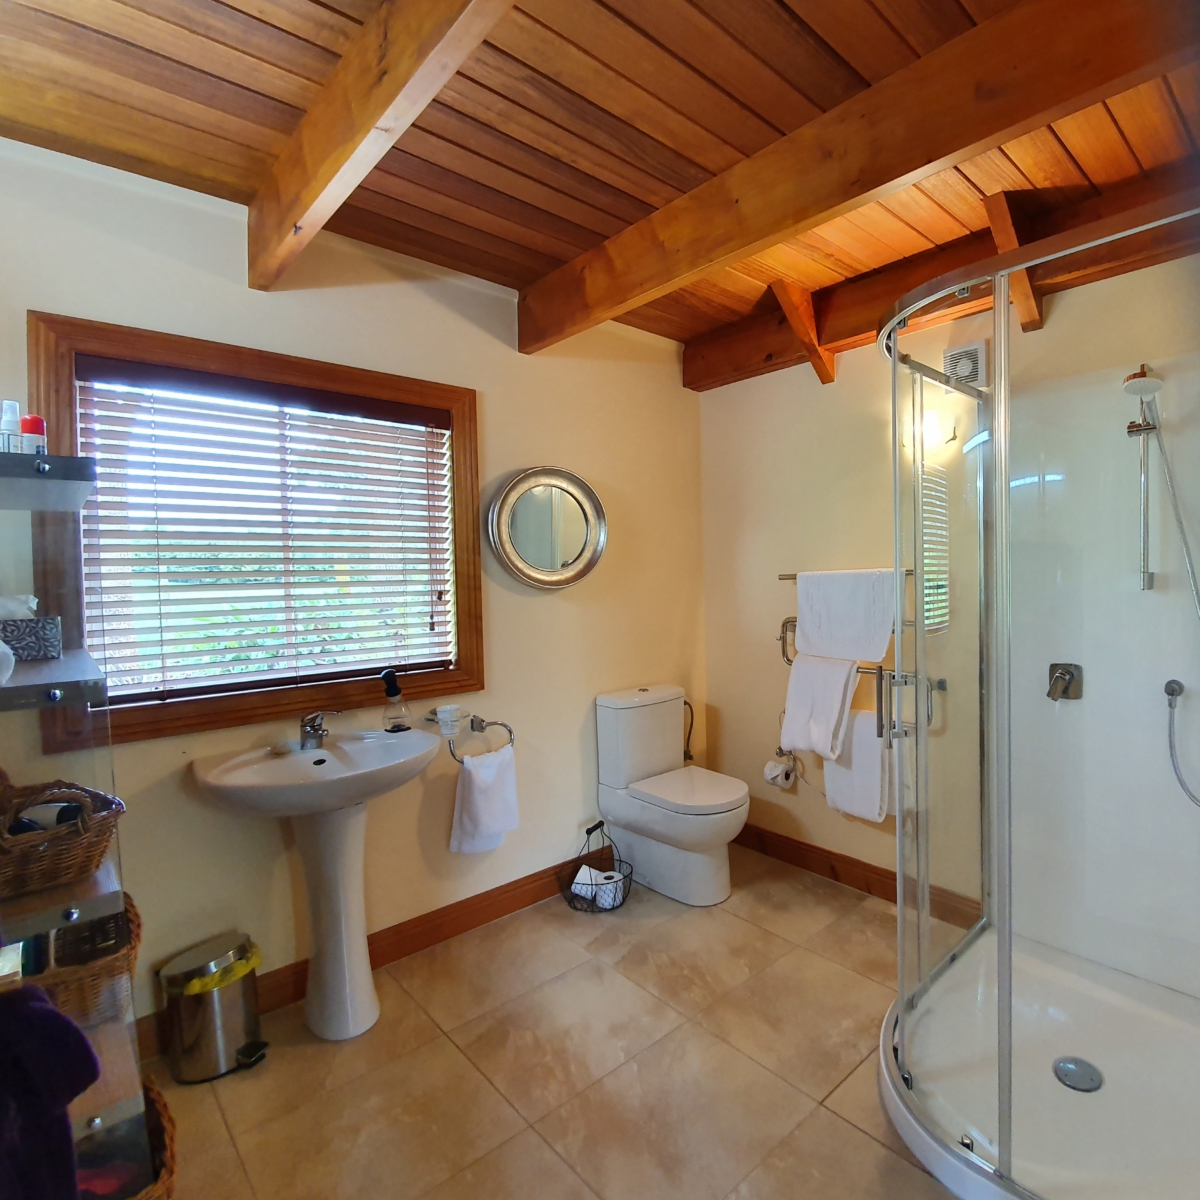 Photo of property: Bathroom downstairs 